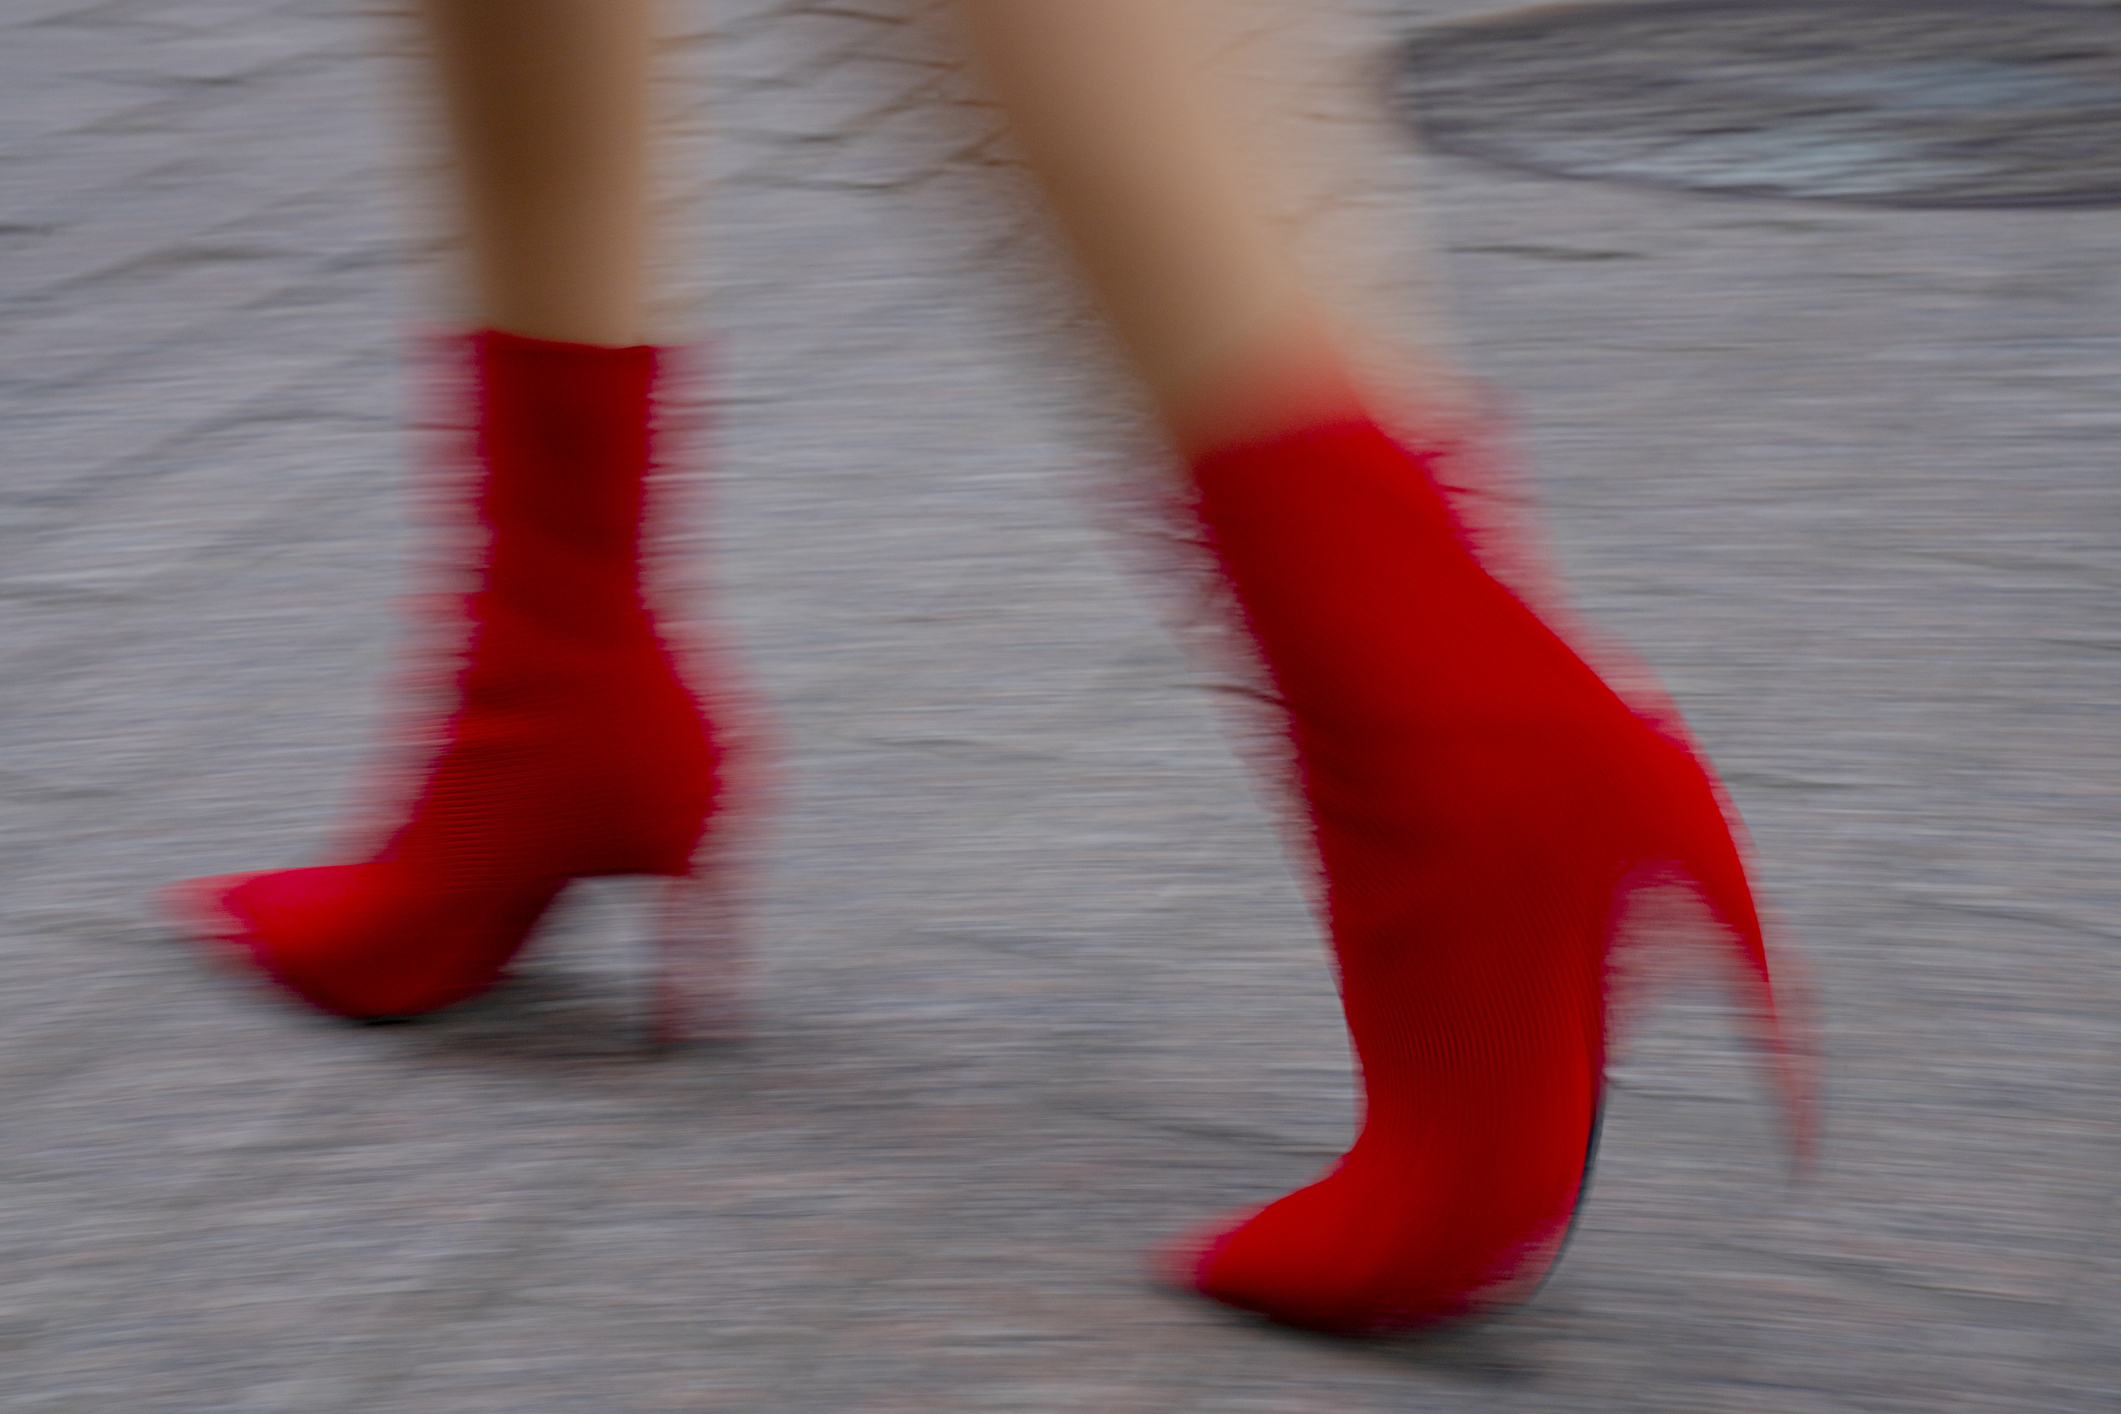 Blurred image of a person walking wearing high-heeled red boots